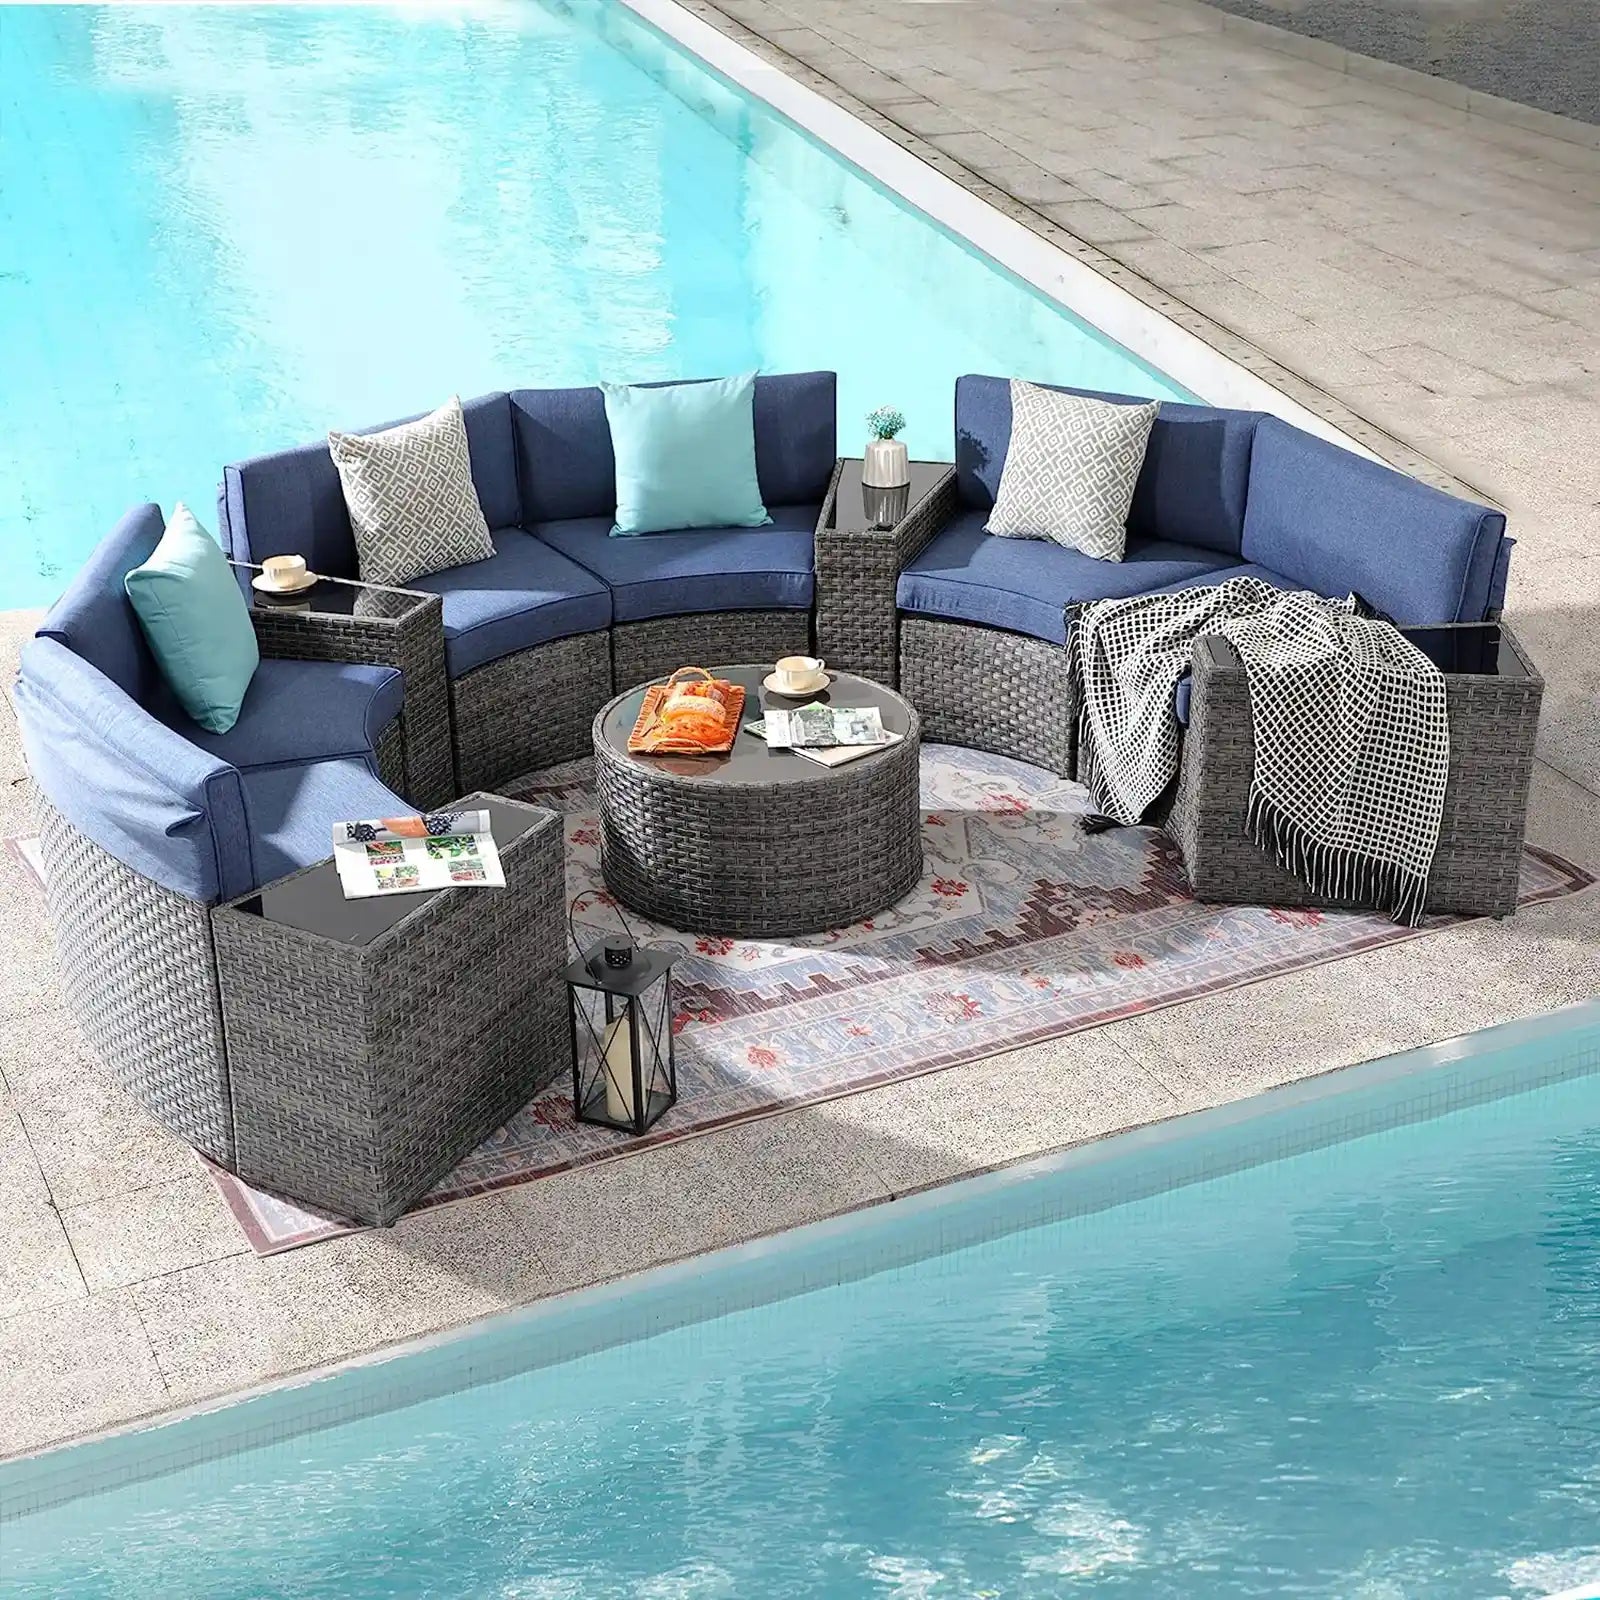 Outdoor Patio Furniture 11-Piece Half-Moon Sectional Round Patio Furniture Set Curved Outdoor Sofa with Tempered Glass Round Coffee Table, 4 Pillows